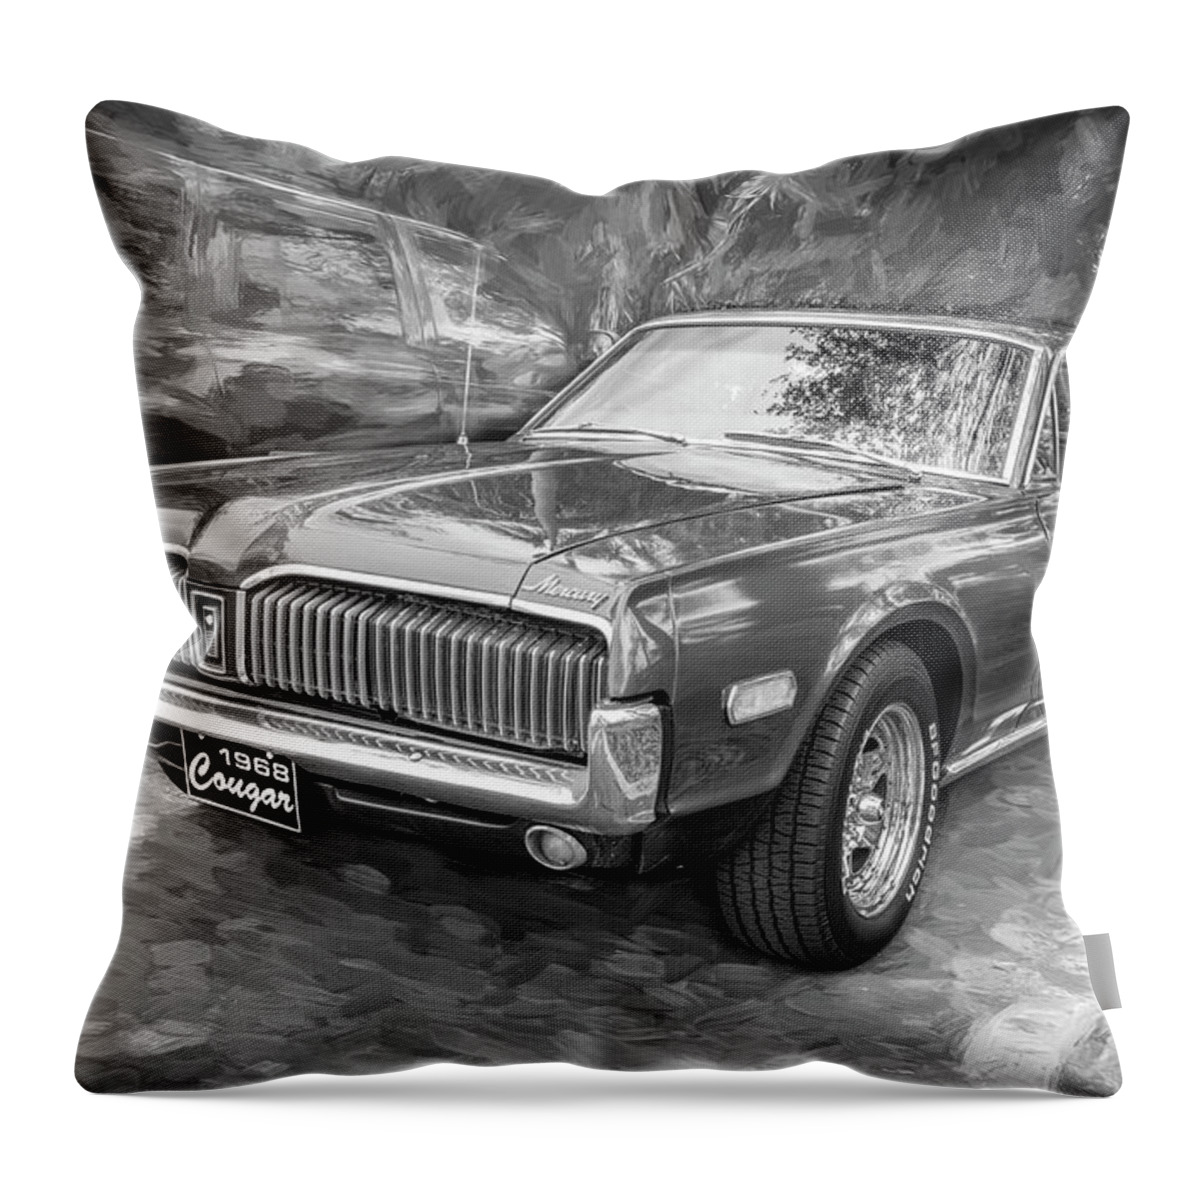 1968 Green Mercury Cougar Throw Pillow featuring the photograph 1968 Mercury Cougar X103 by Rich Franco